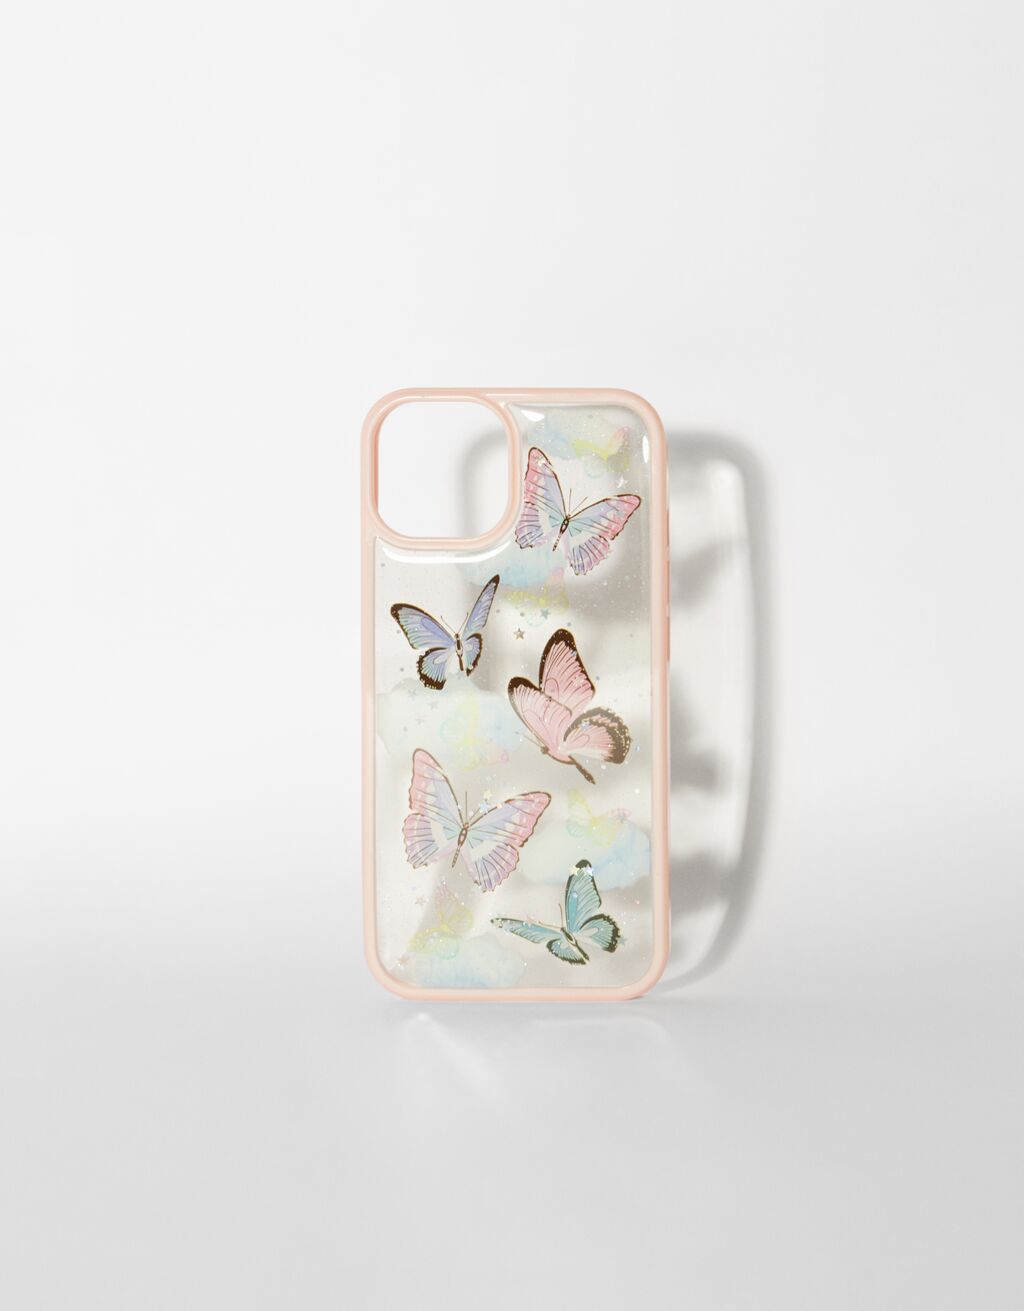 Butterfly iPhone case